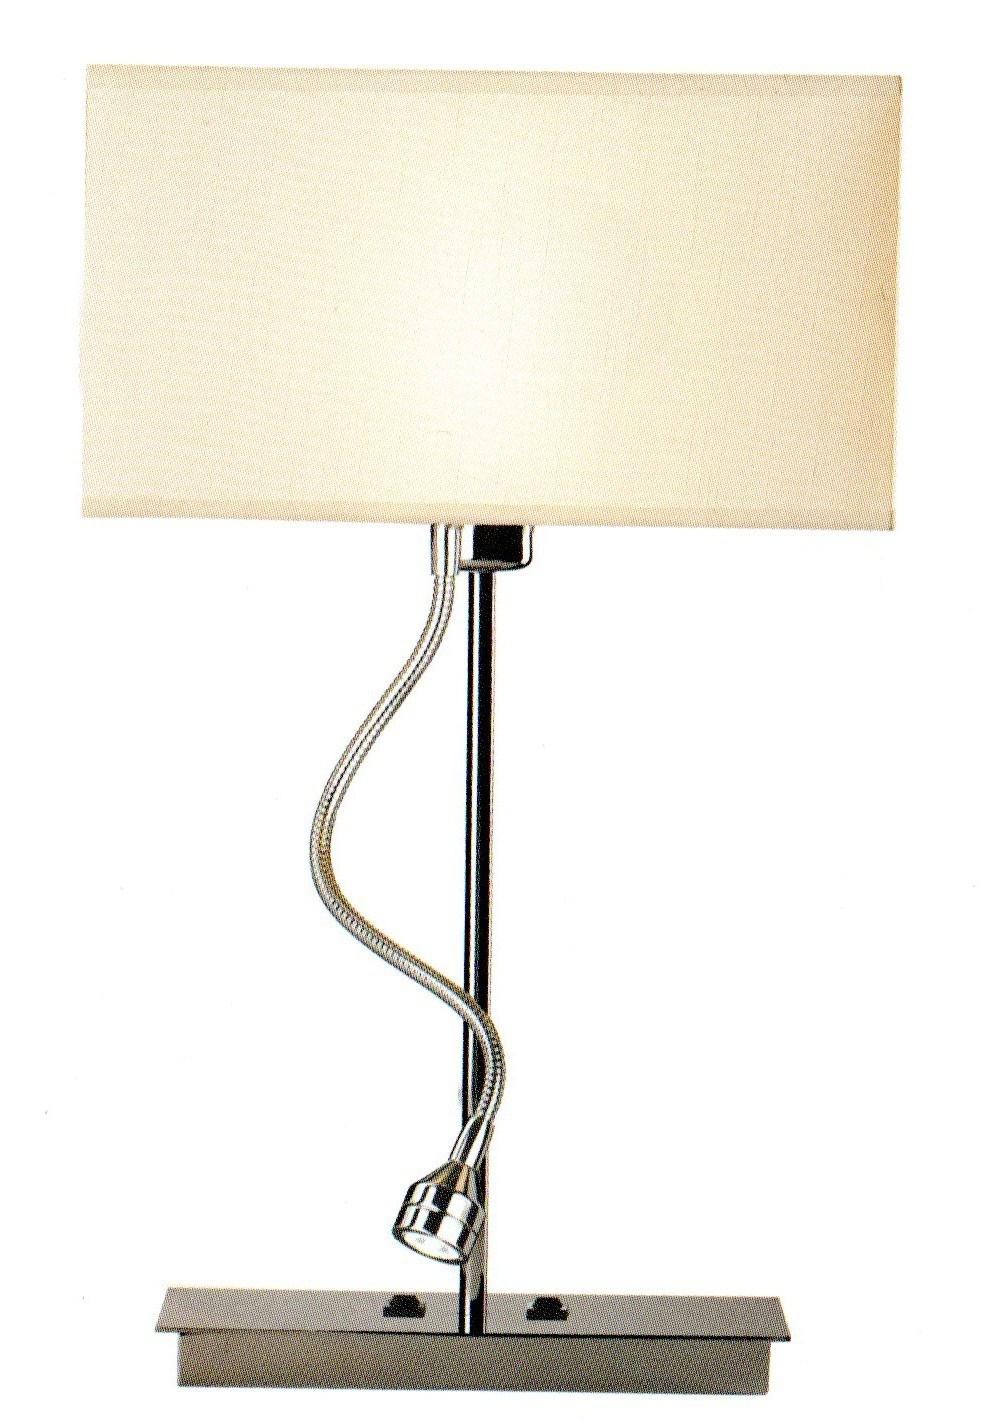 10 key tips for choosing the ideal Bedside table reading lamps